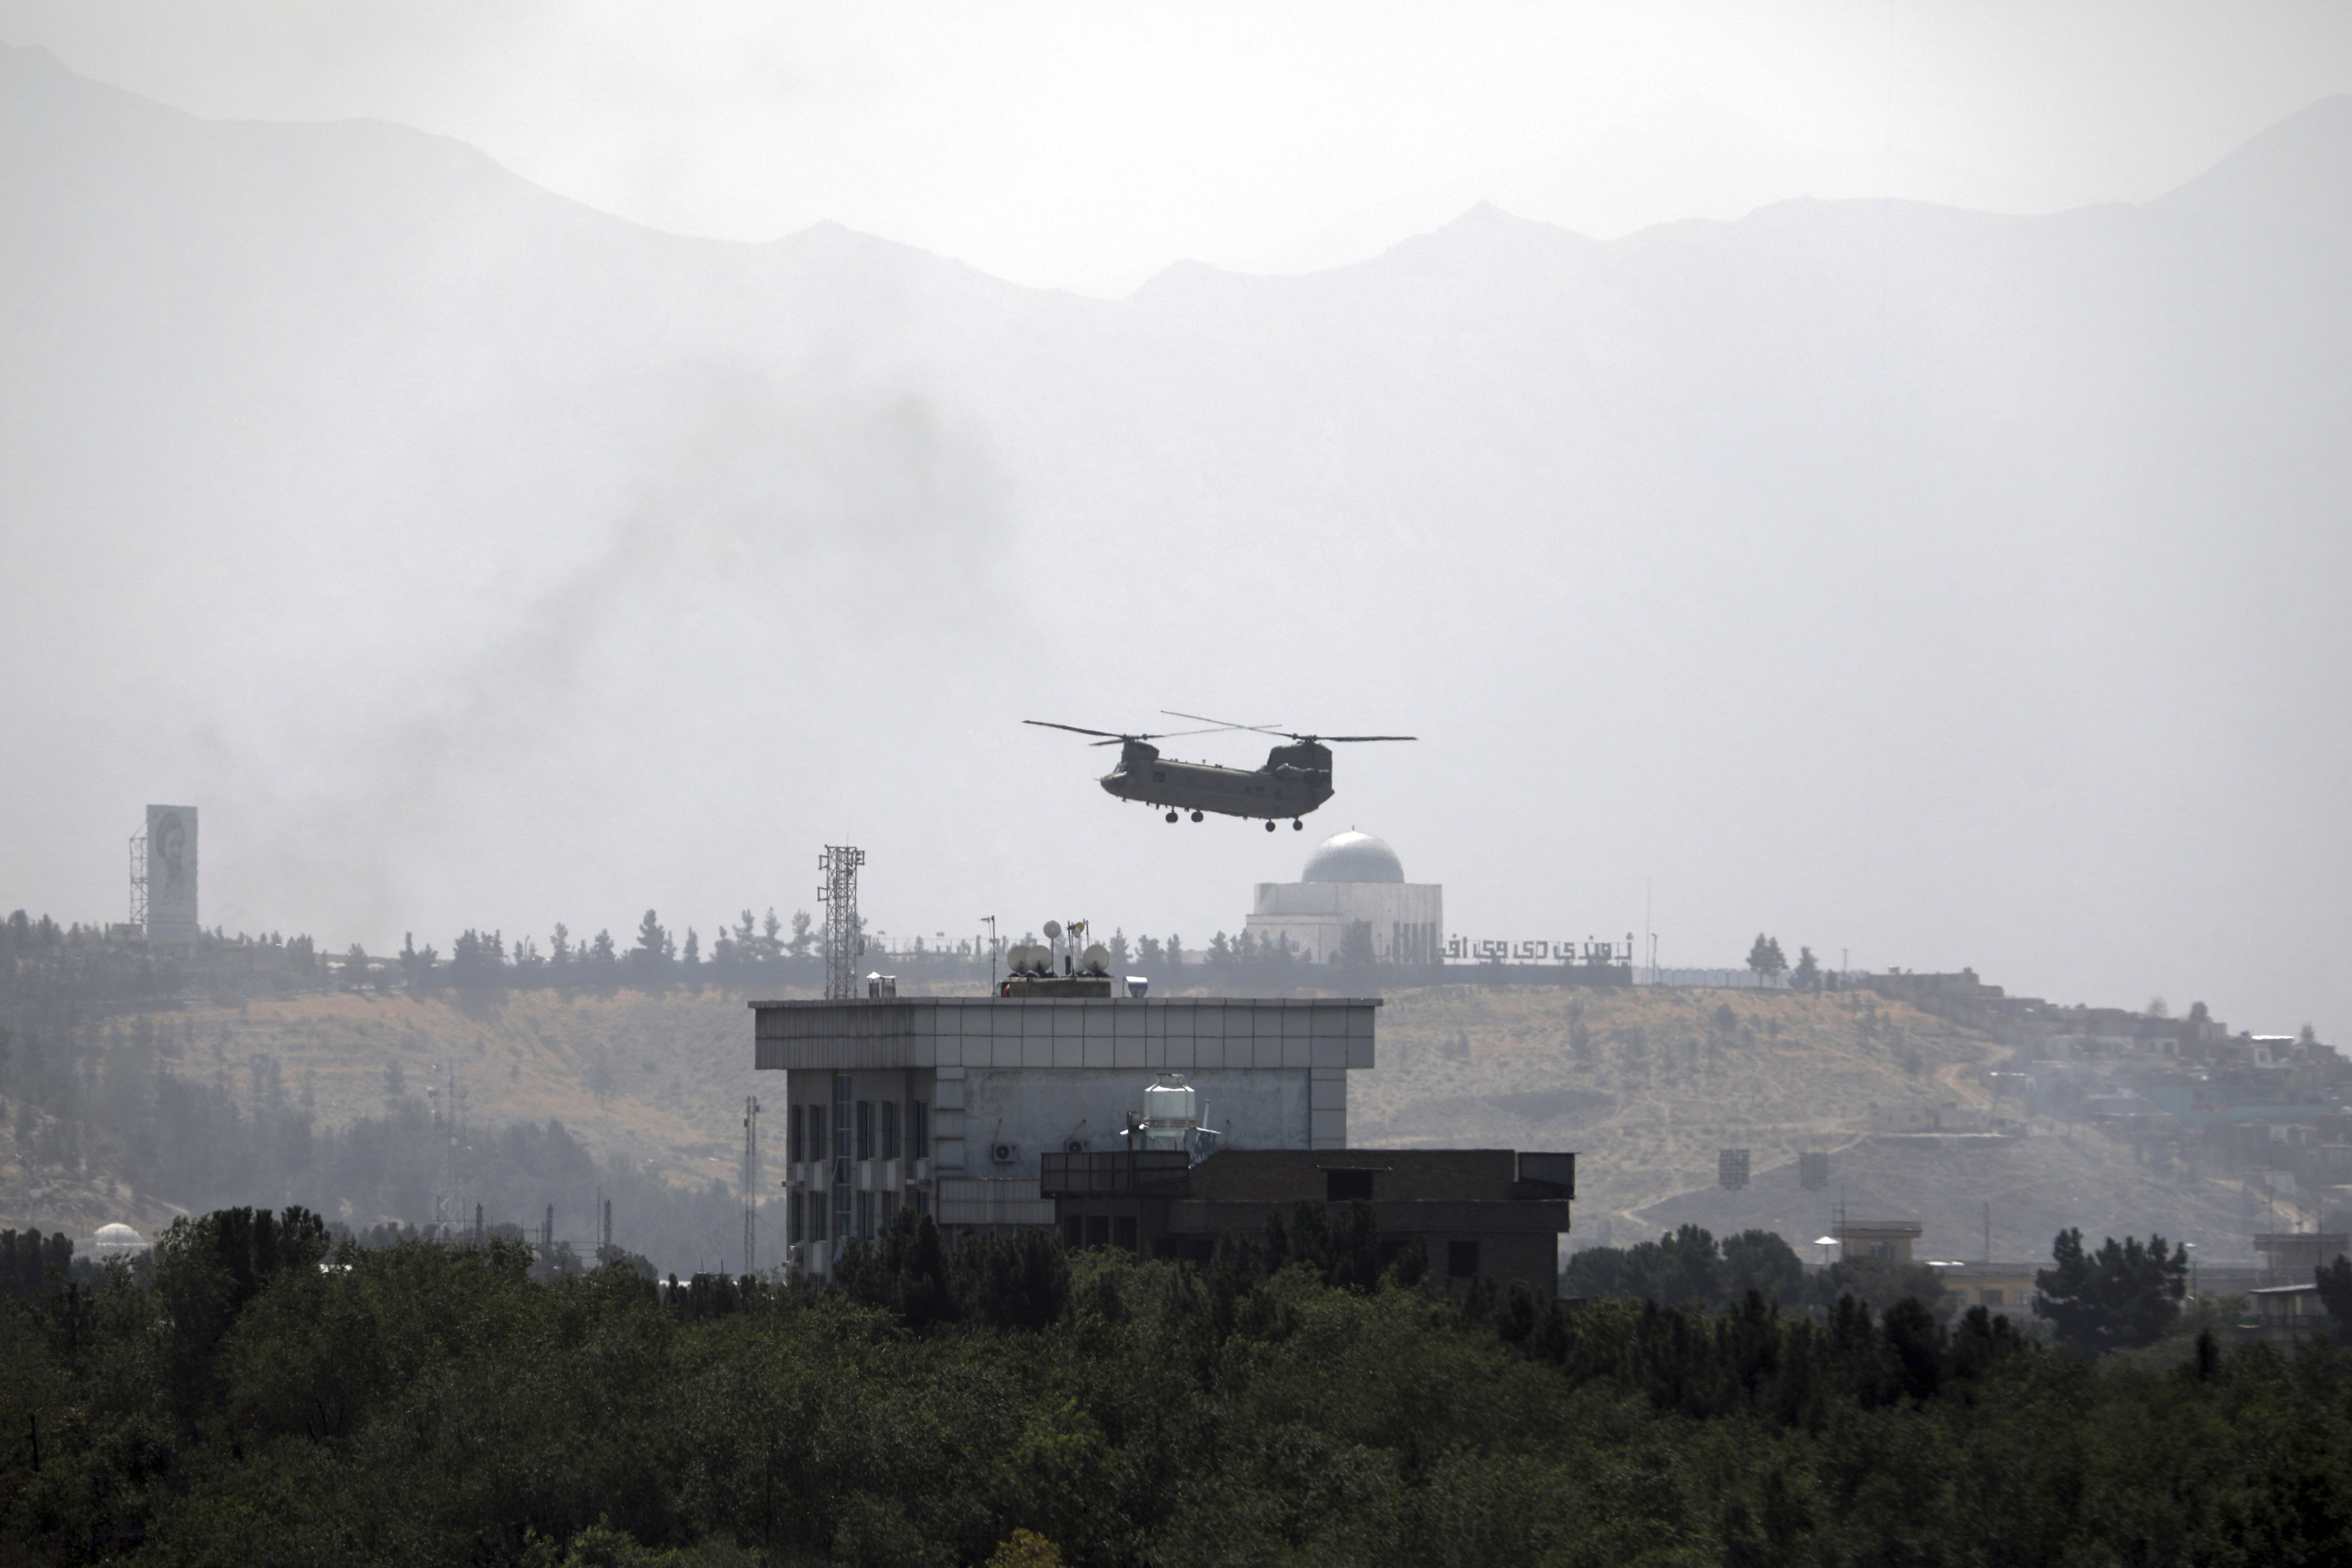 A US Chinook helicopter flies over the US Embassy in Kabul, Afghanistan during the Taliban’s advance. Photo: AP